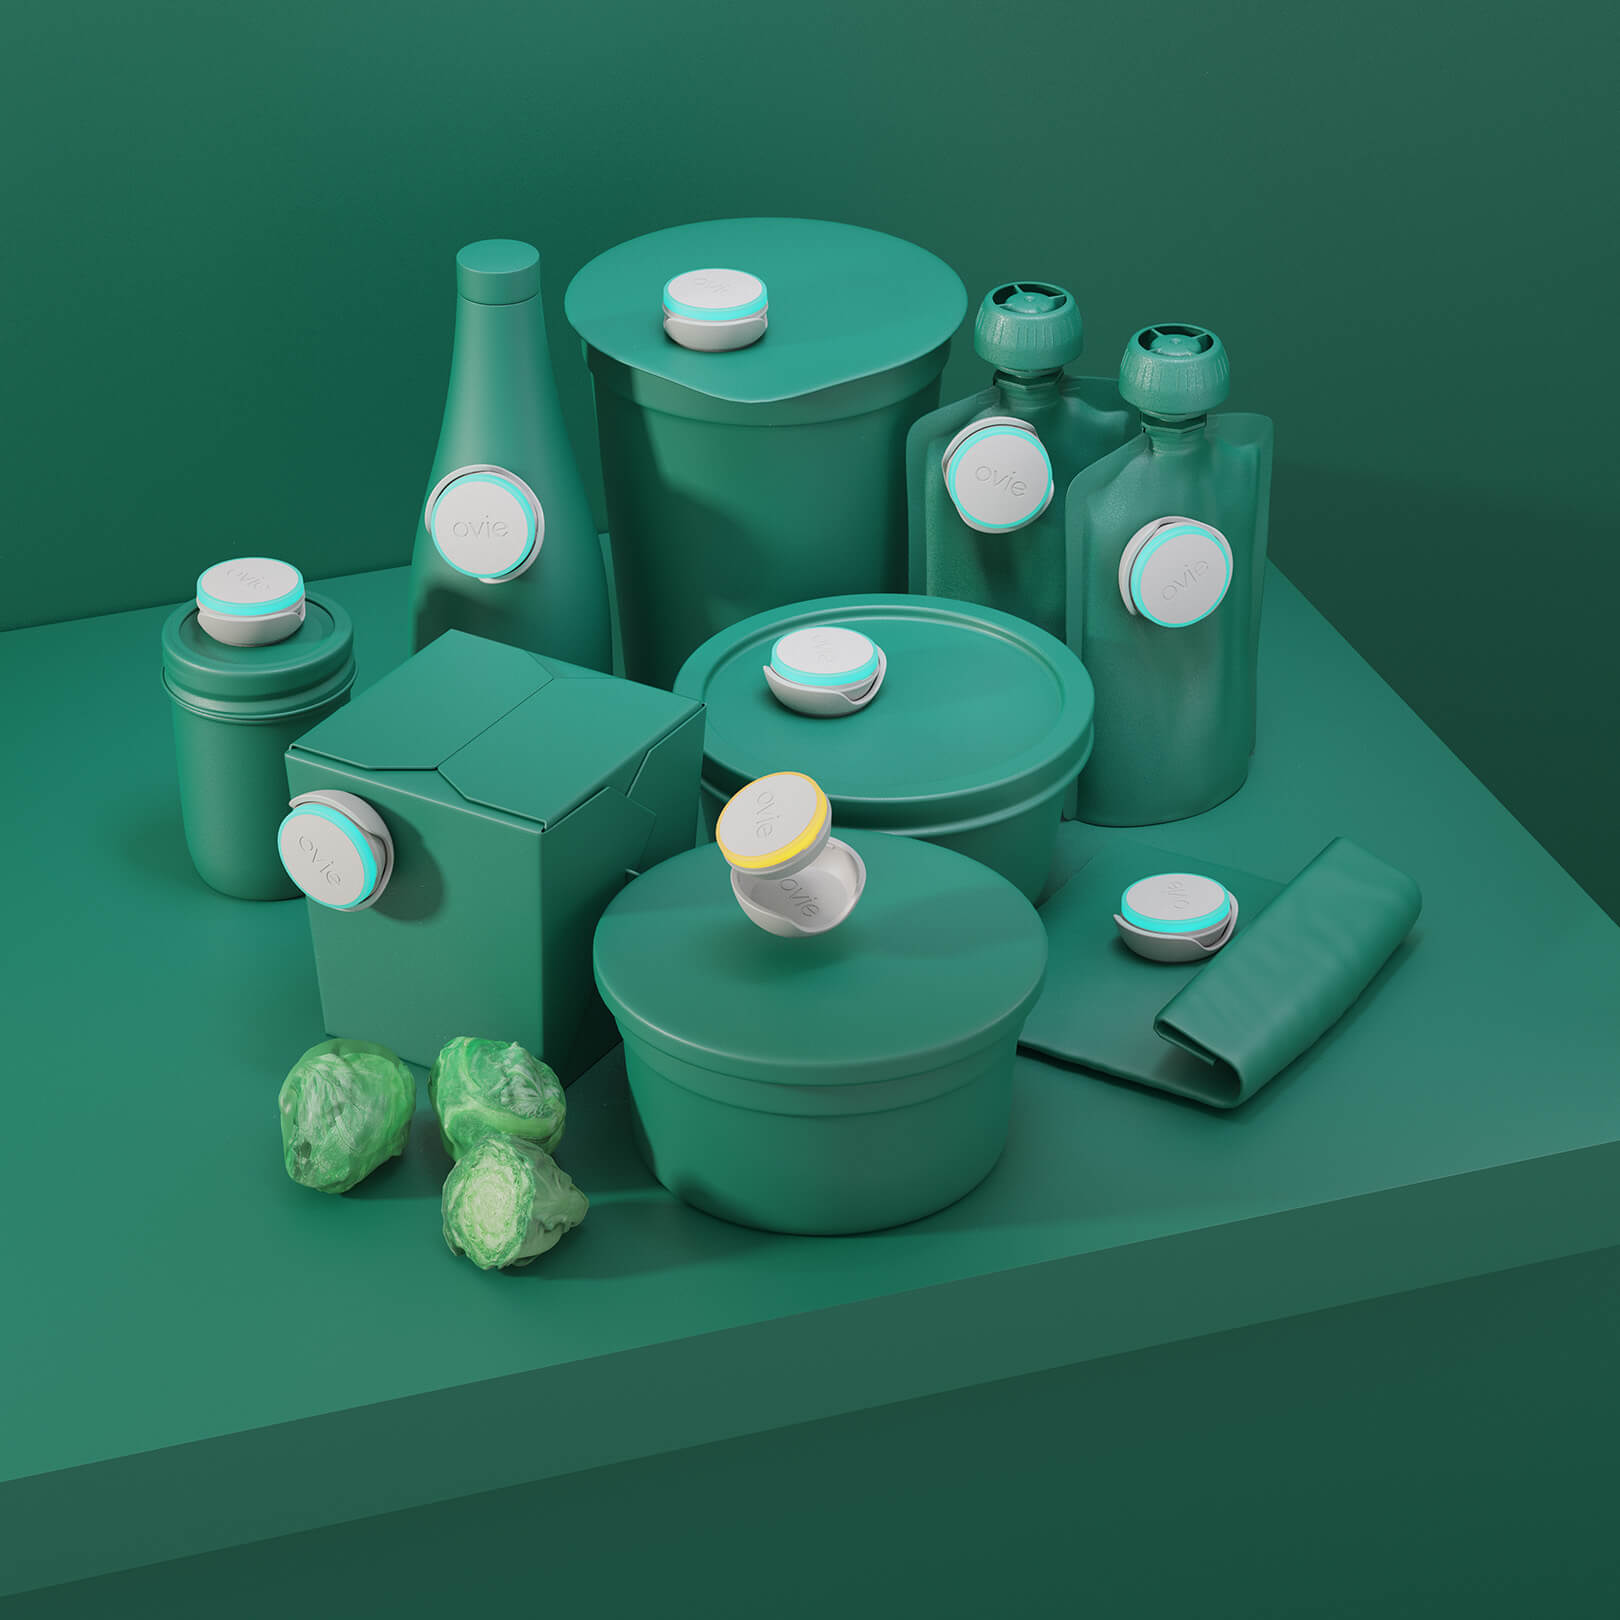 Stylized dark green image with 9 Ovie LightTags placed on various food-shaped containers that match the background. All LightTags are lit teal except for one which is lit yellow